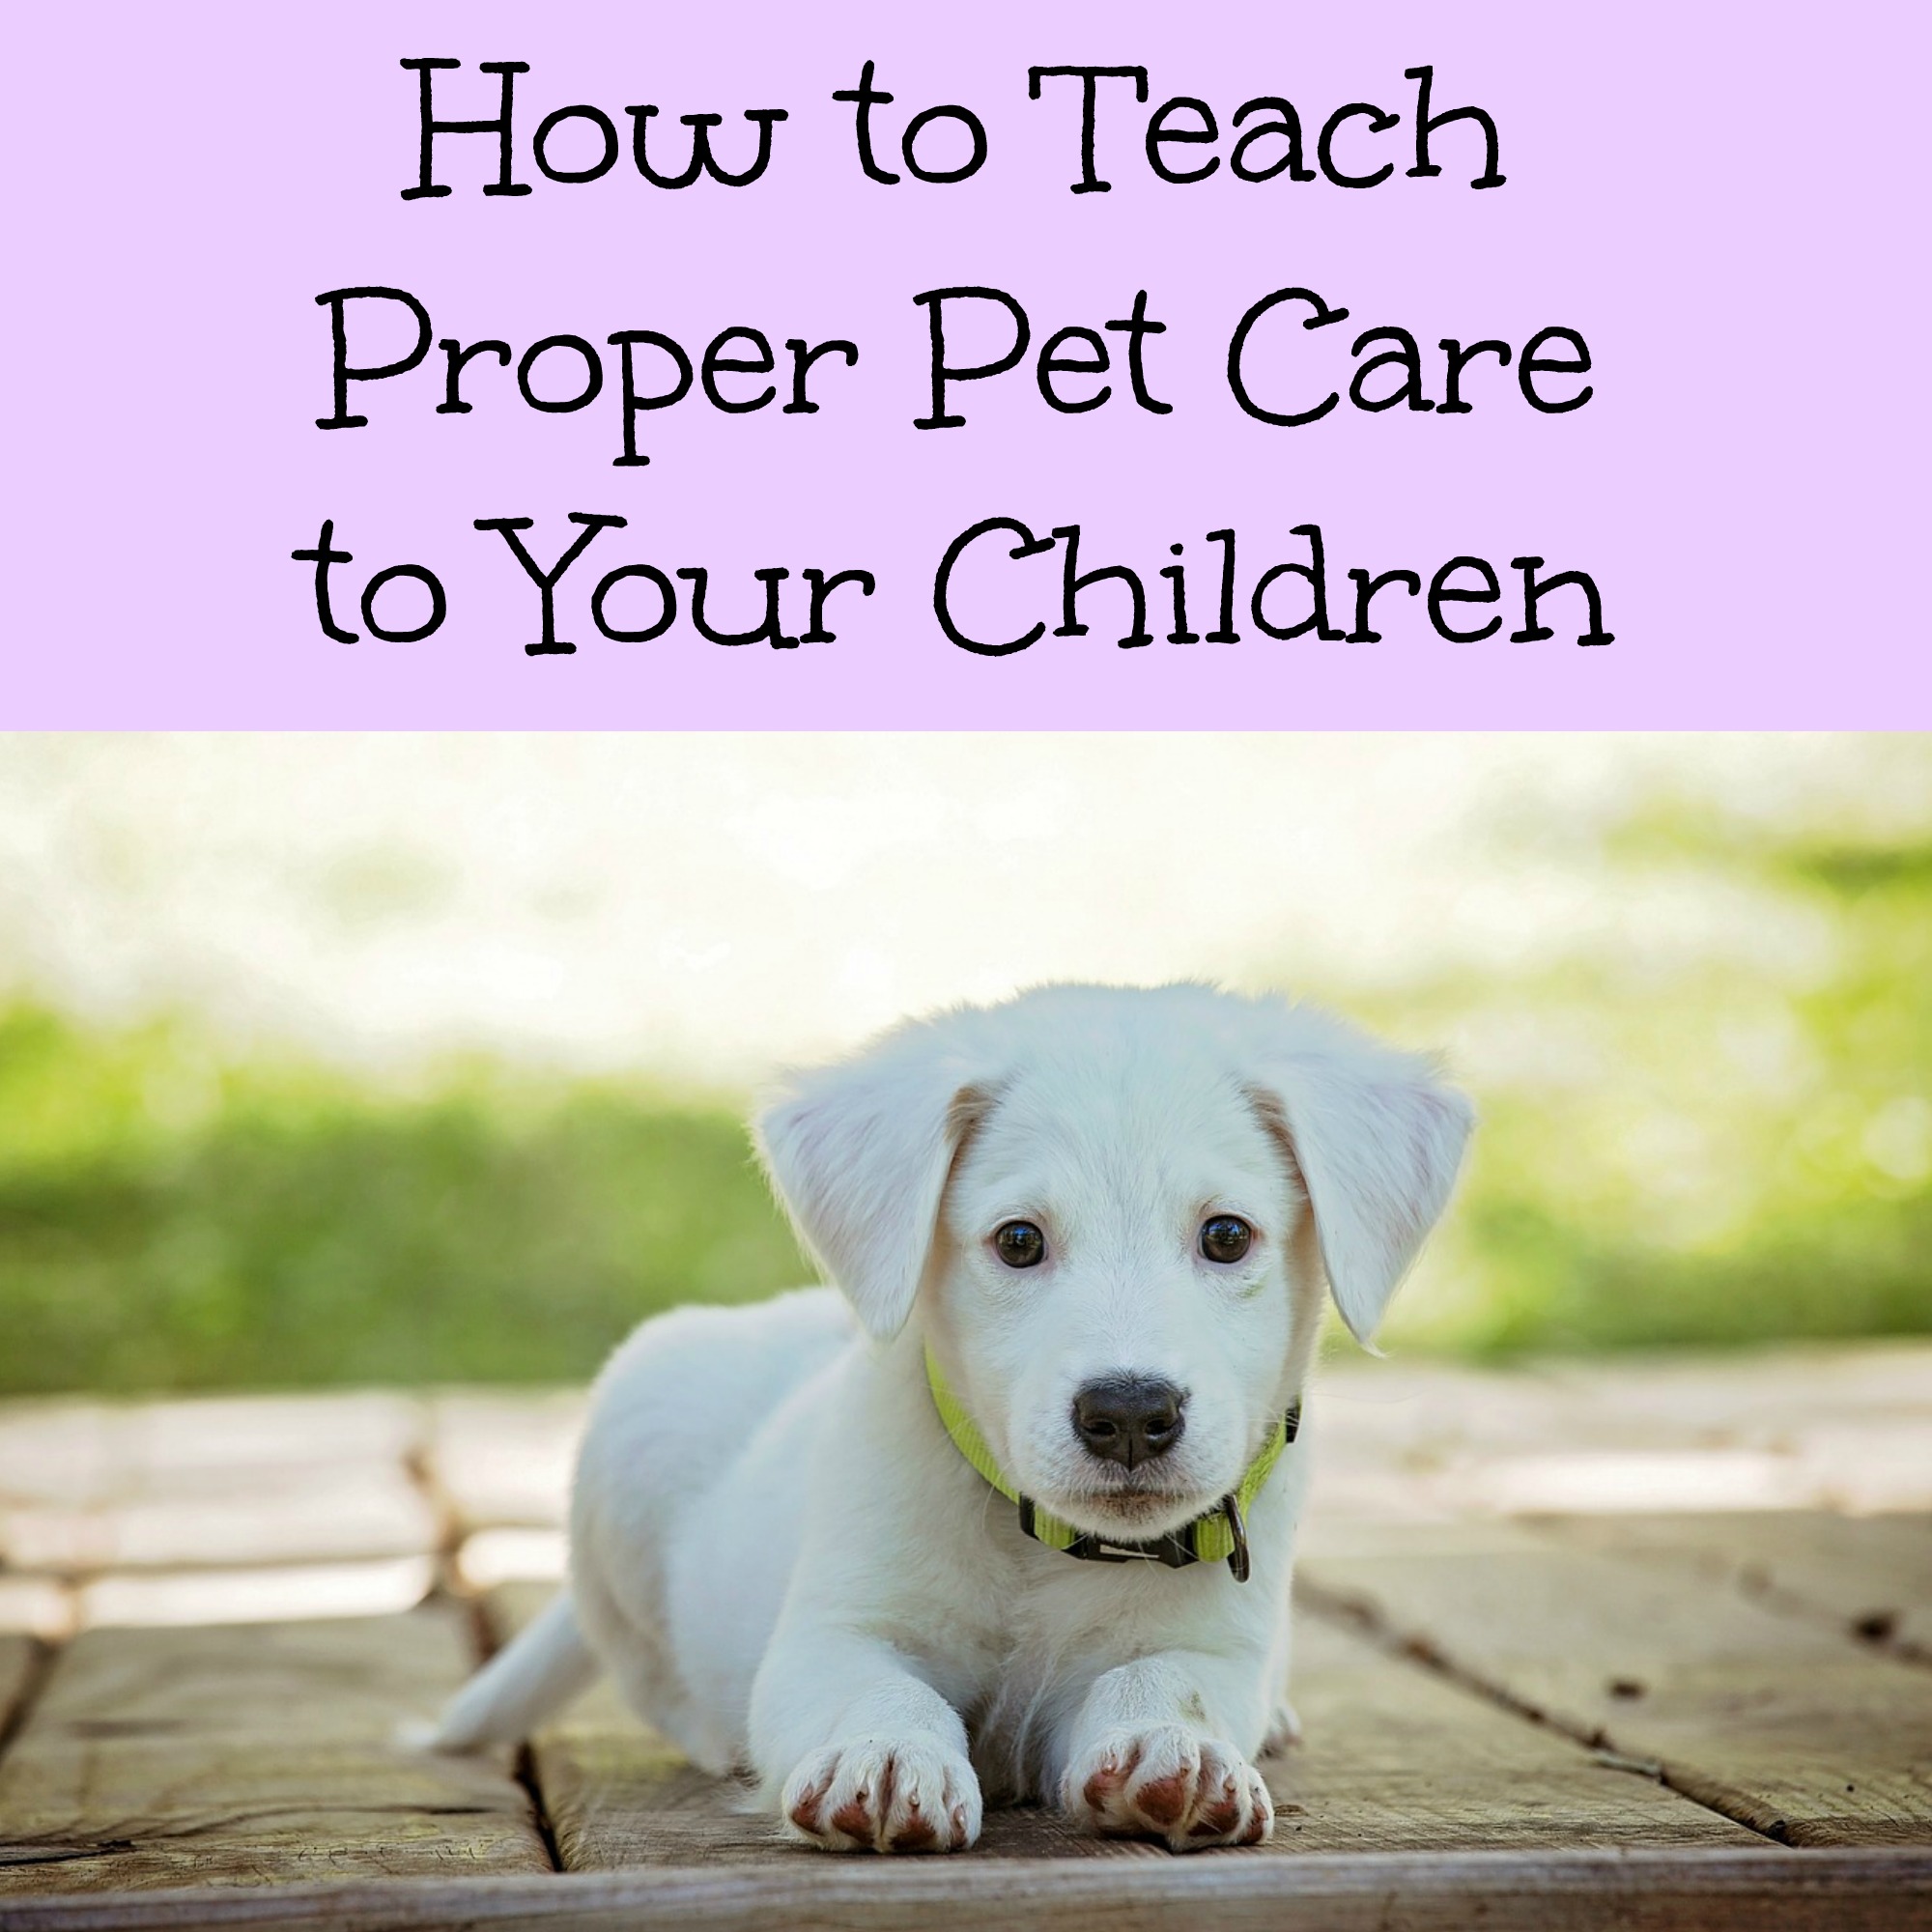 How to Teach Proper Pet Care to Your Children